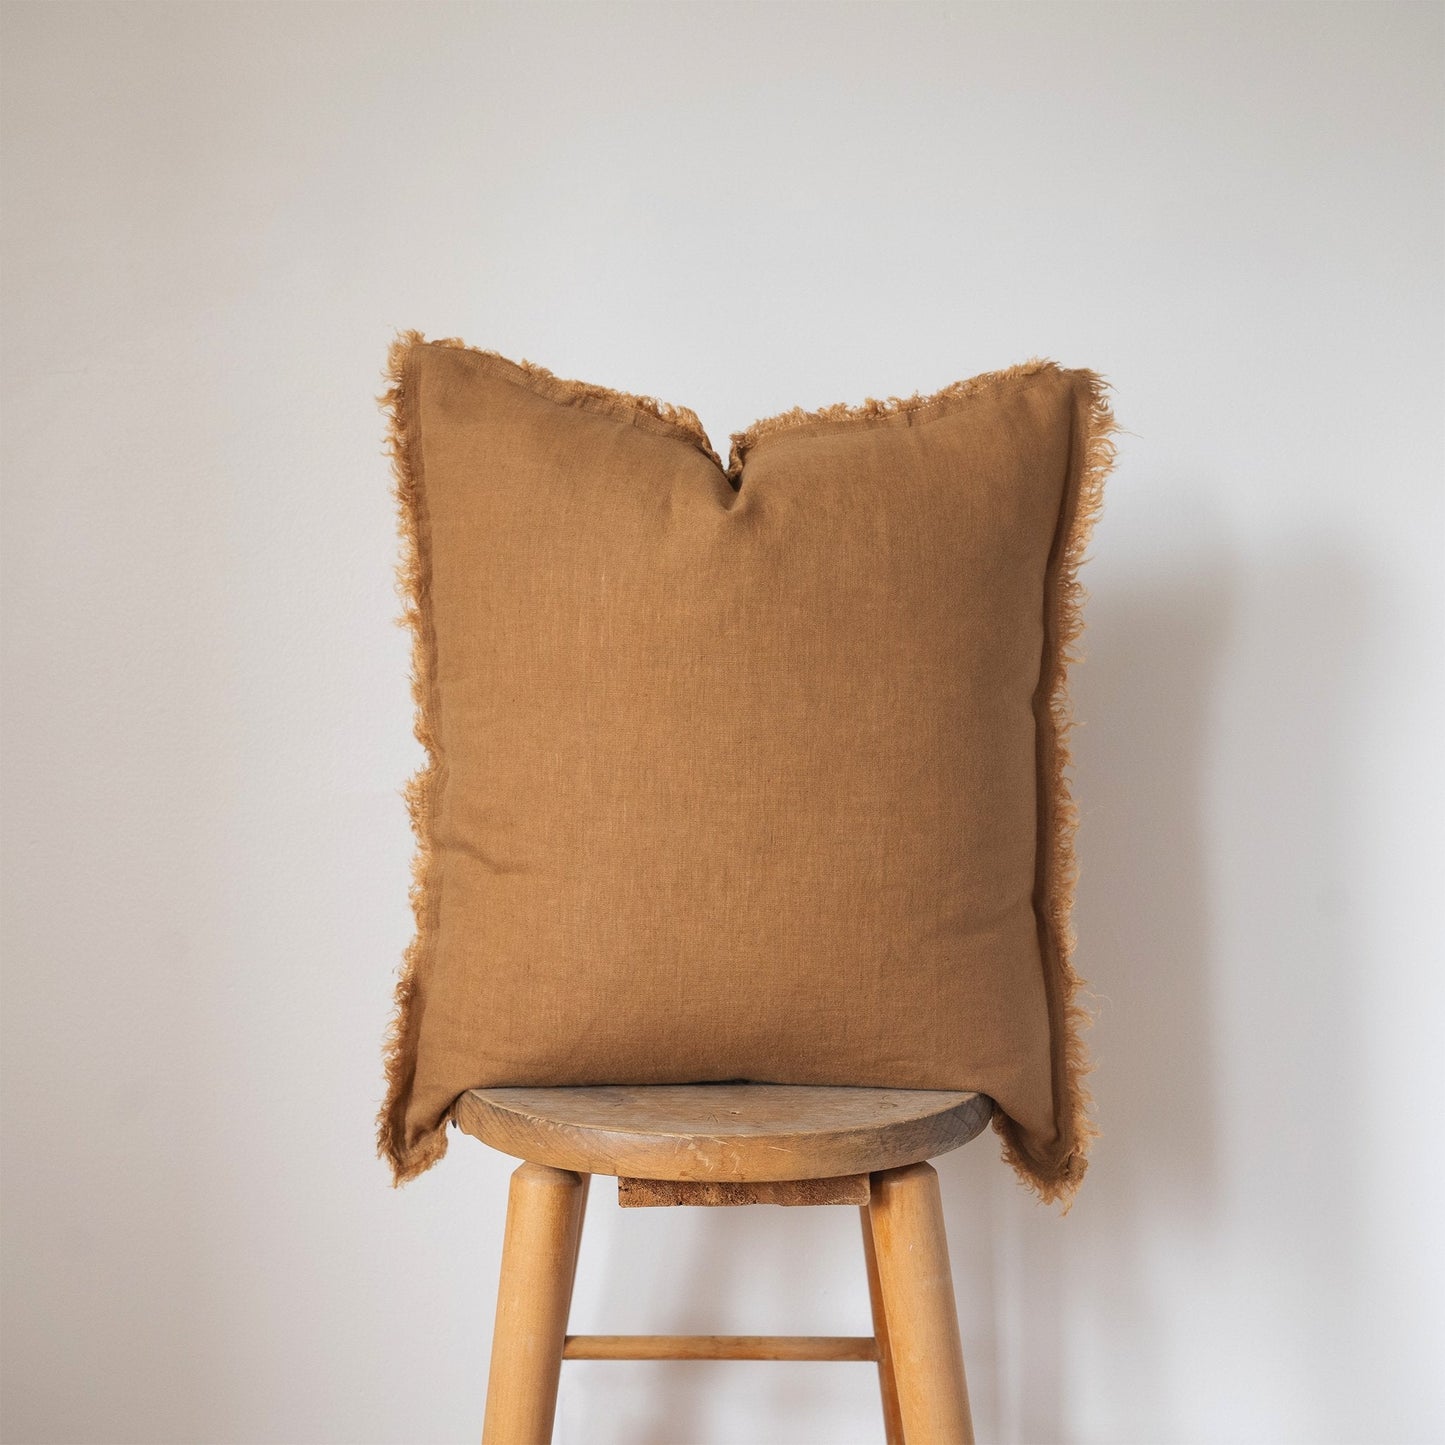 PILLOW, SQUARE FRINGED / LINEN (CAMEL)